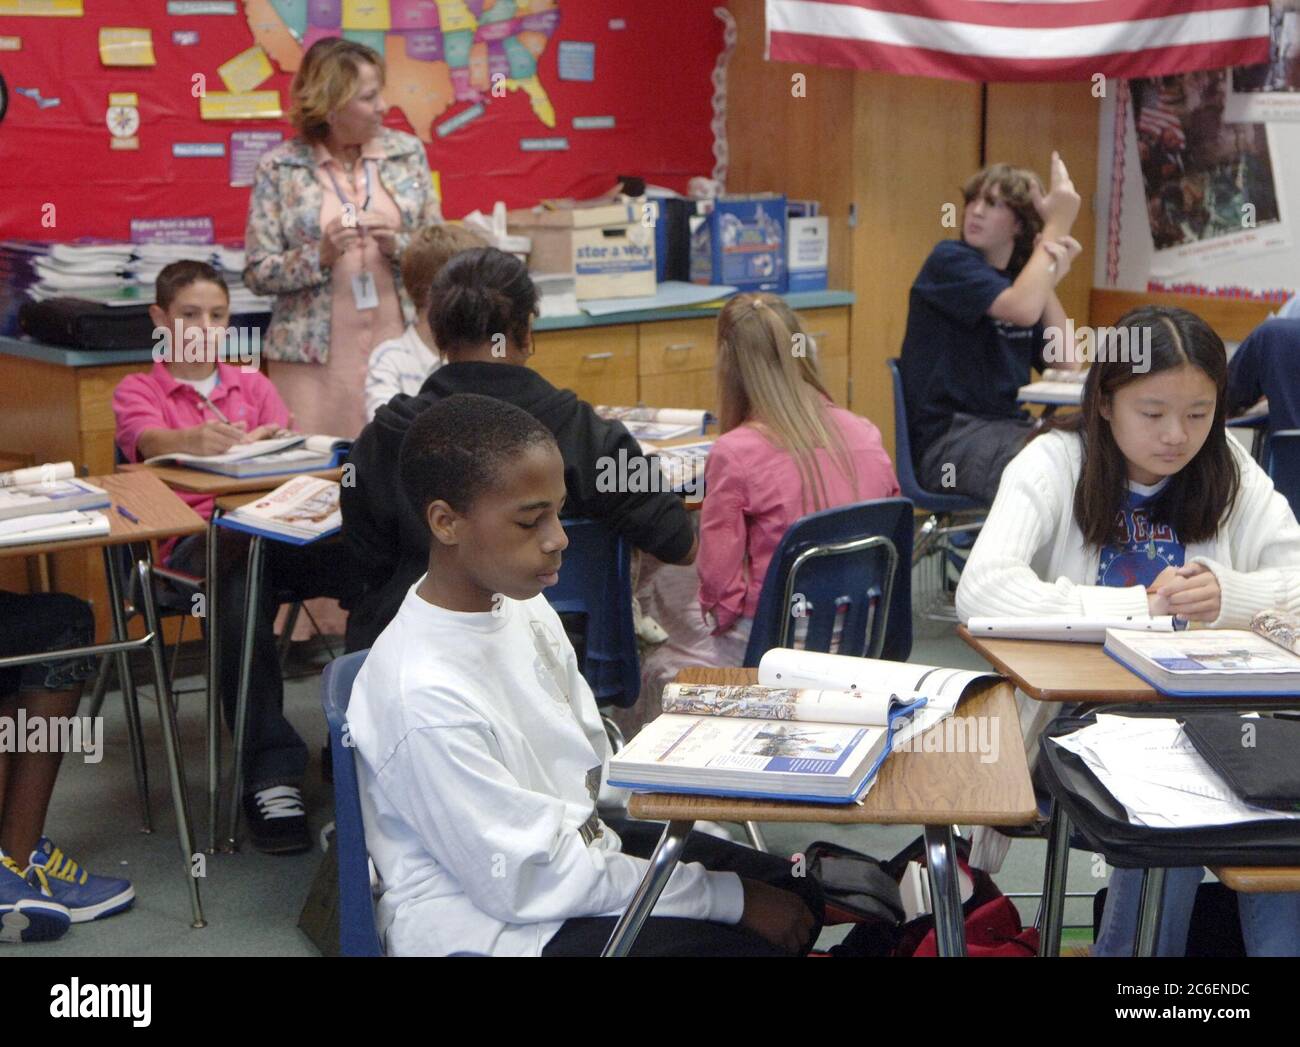 Pflugerville, Texas September 14, 2005:  Eighth grader and Hurricane Katrina evacuee  Herbert Barrington participates in Roberta Sherfy's World Geography class Wednesday, his second week of school in Texas. Barrington's mother, a newspaper reporter, is working in Louisana covering hurricane cleanup efforts. Stock Photo